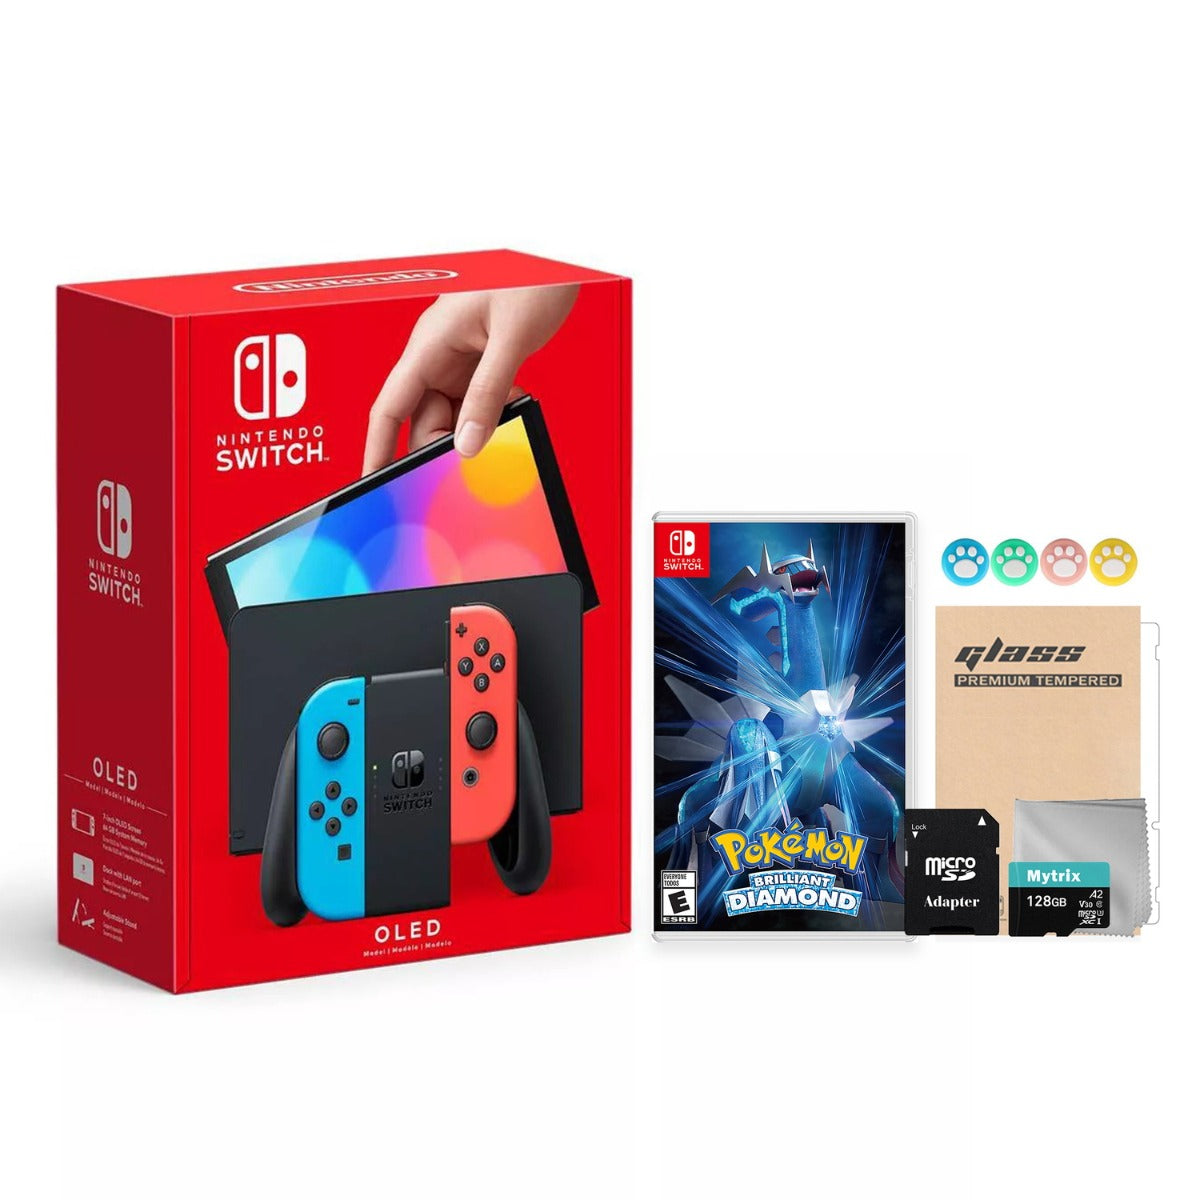 2022 New Nintendo Switch OLED Model Neon Red Blue Joy Con 64GB Console Improved HD Screen & LAN-Port Dock with Pokemon Brilliant Diamond, Mytrix 128GB MicroSD Card and Accessories